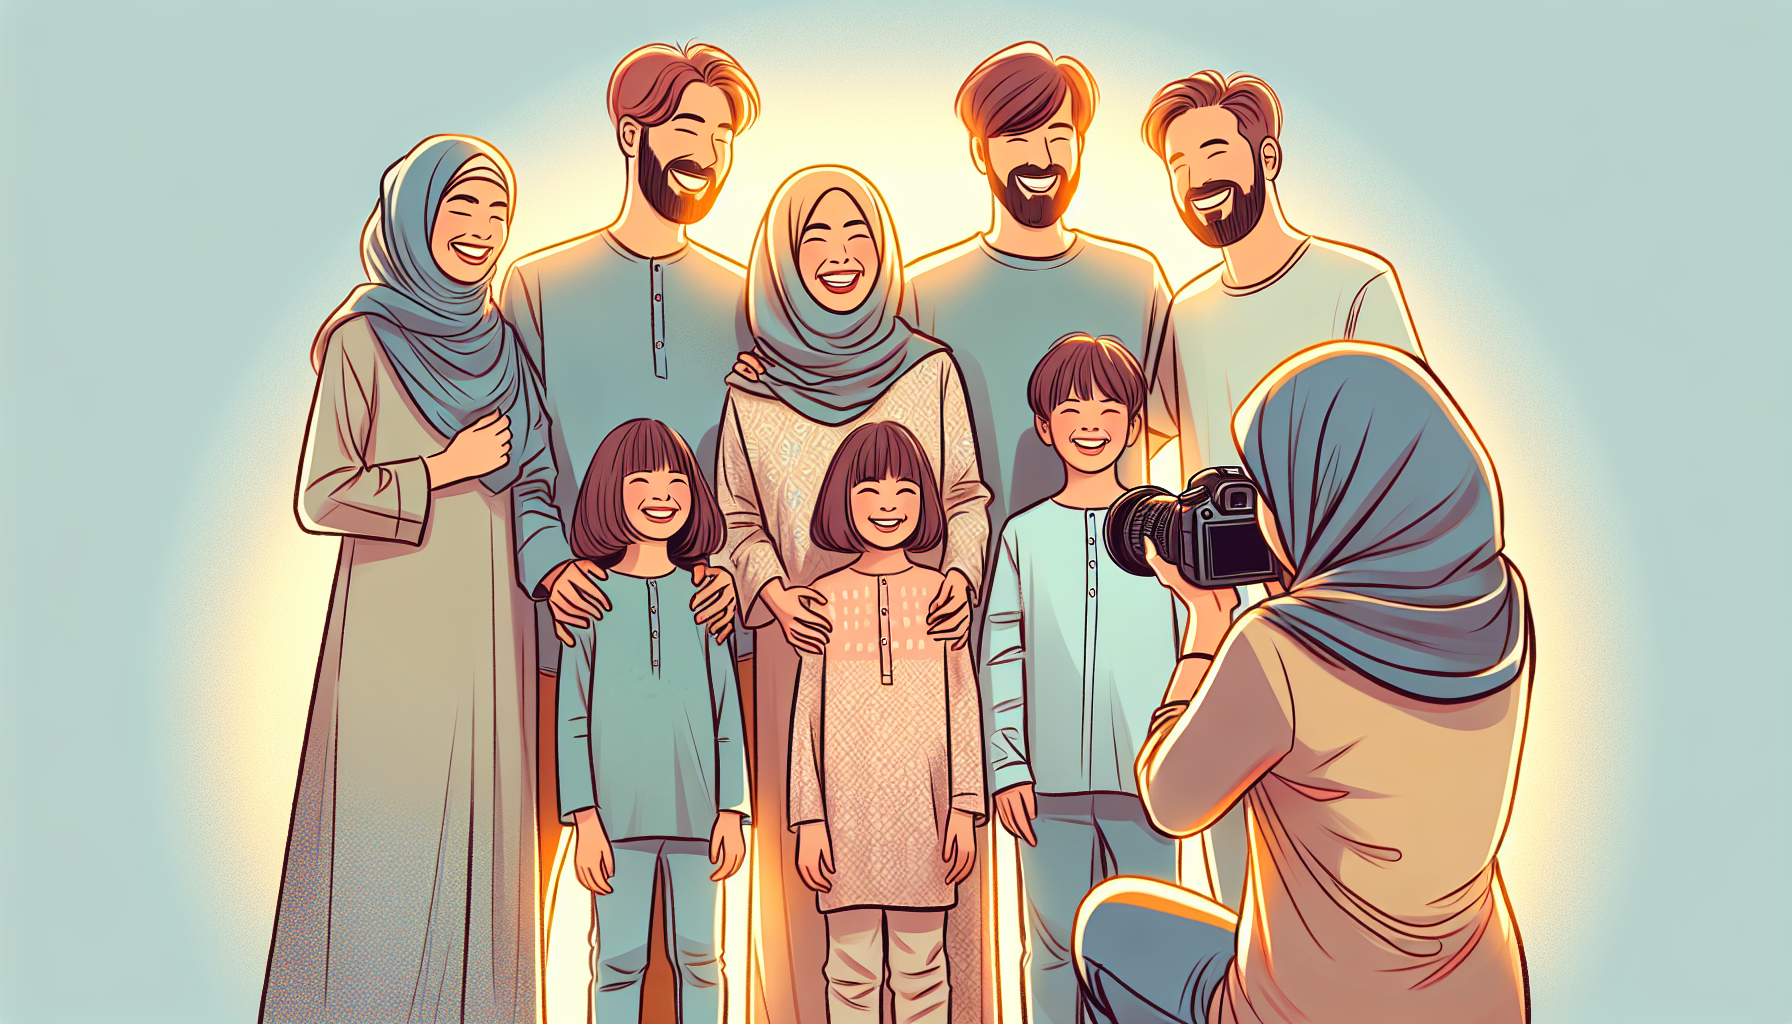 Illustration of a family posing for a portrait photography session